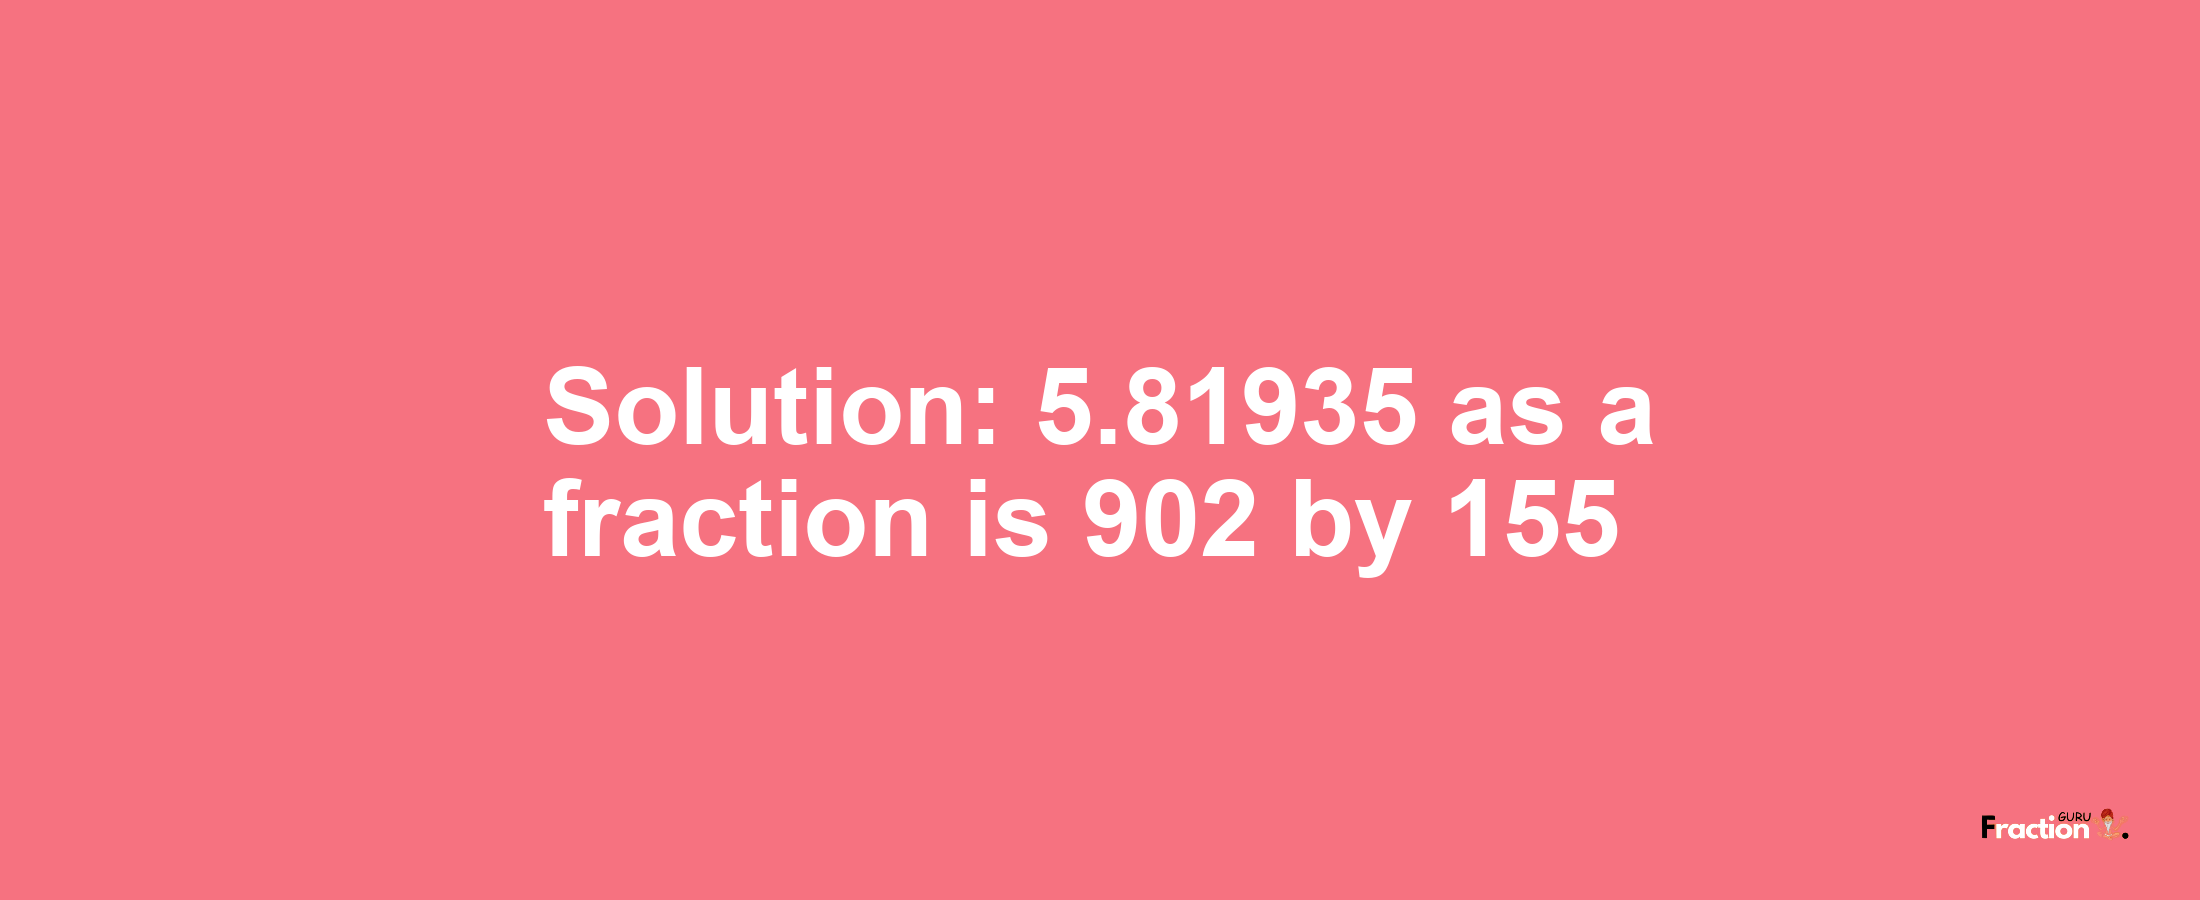 Solution:5.81935 as a fraction is 902/155